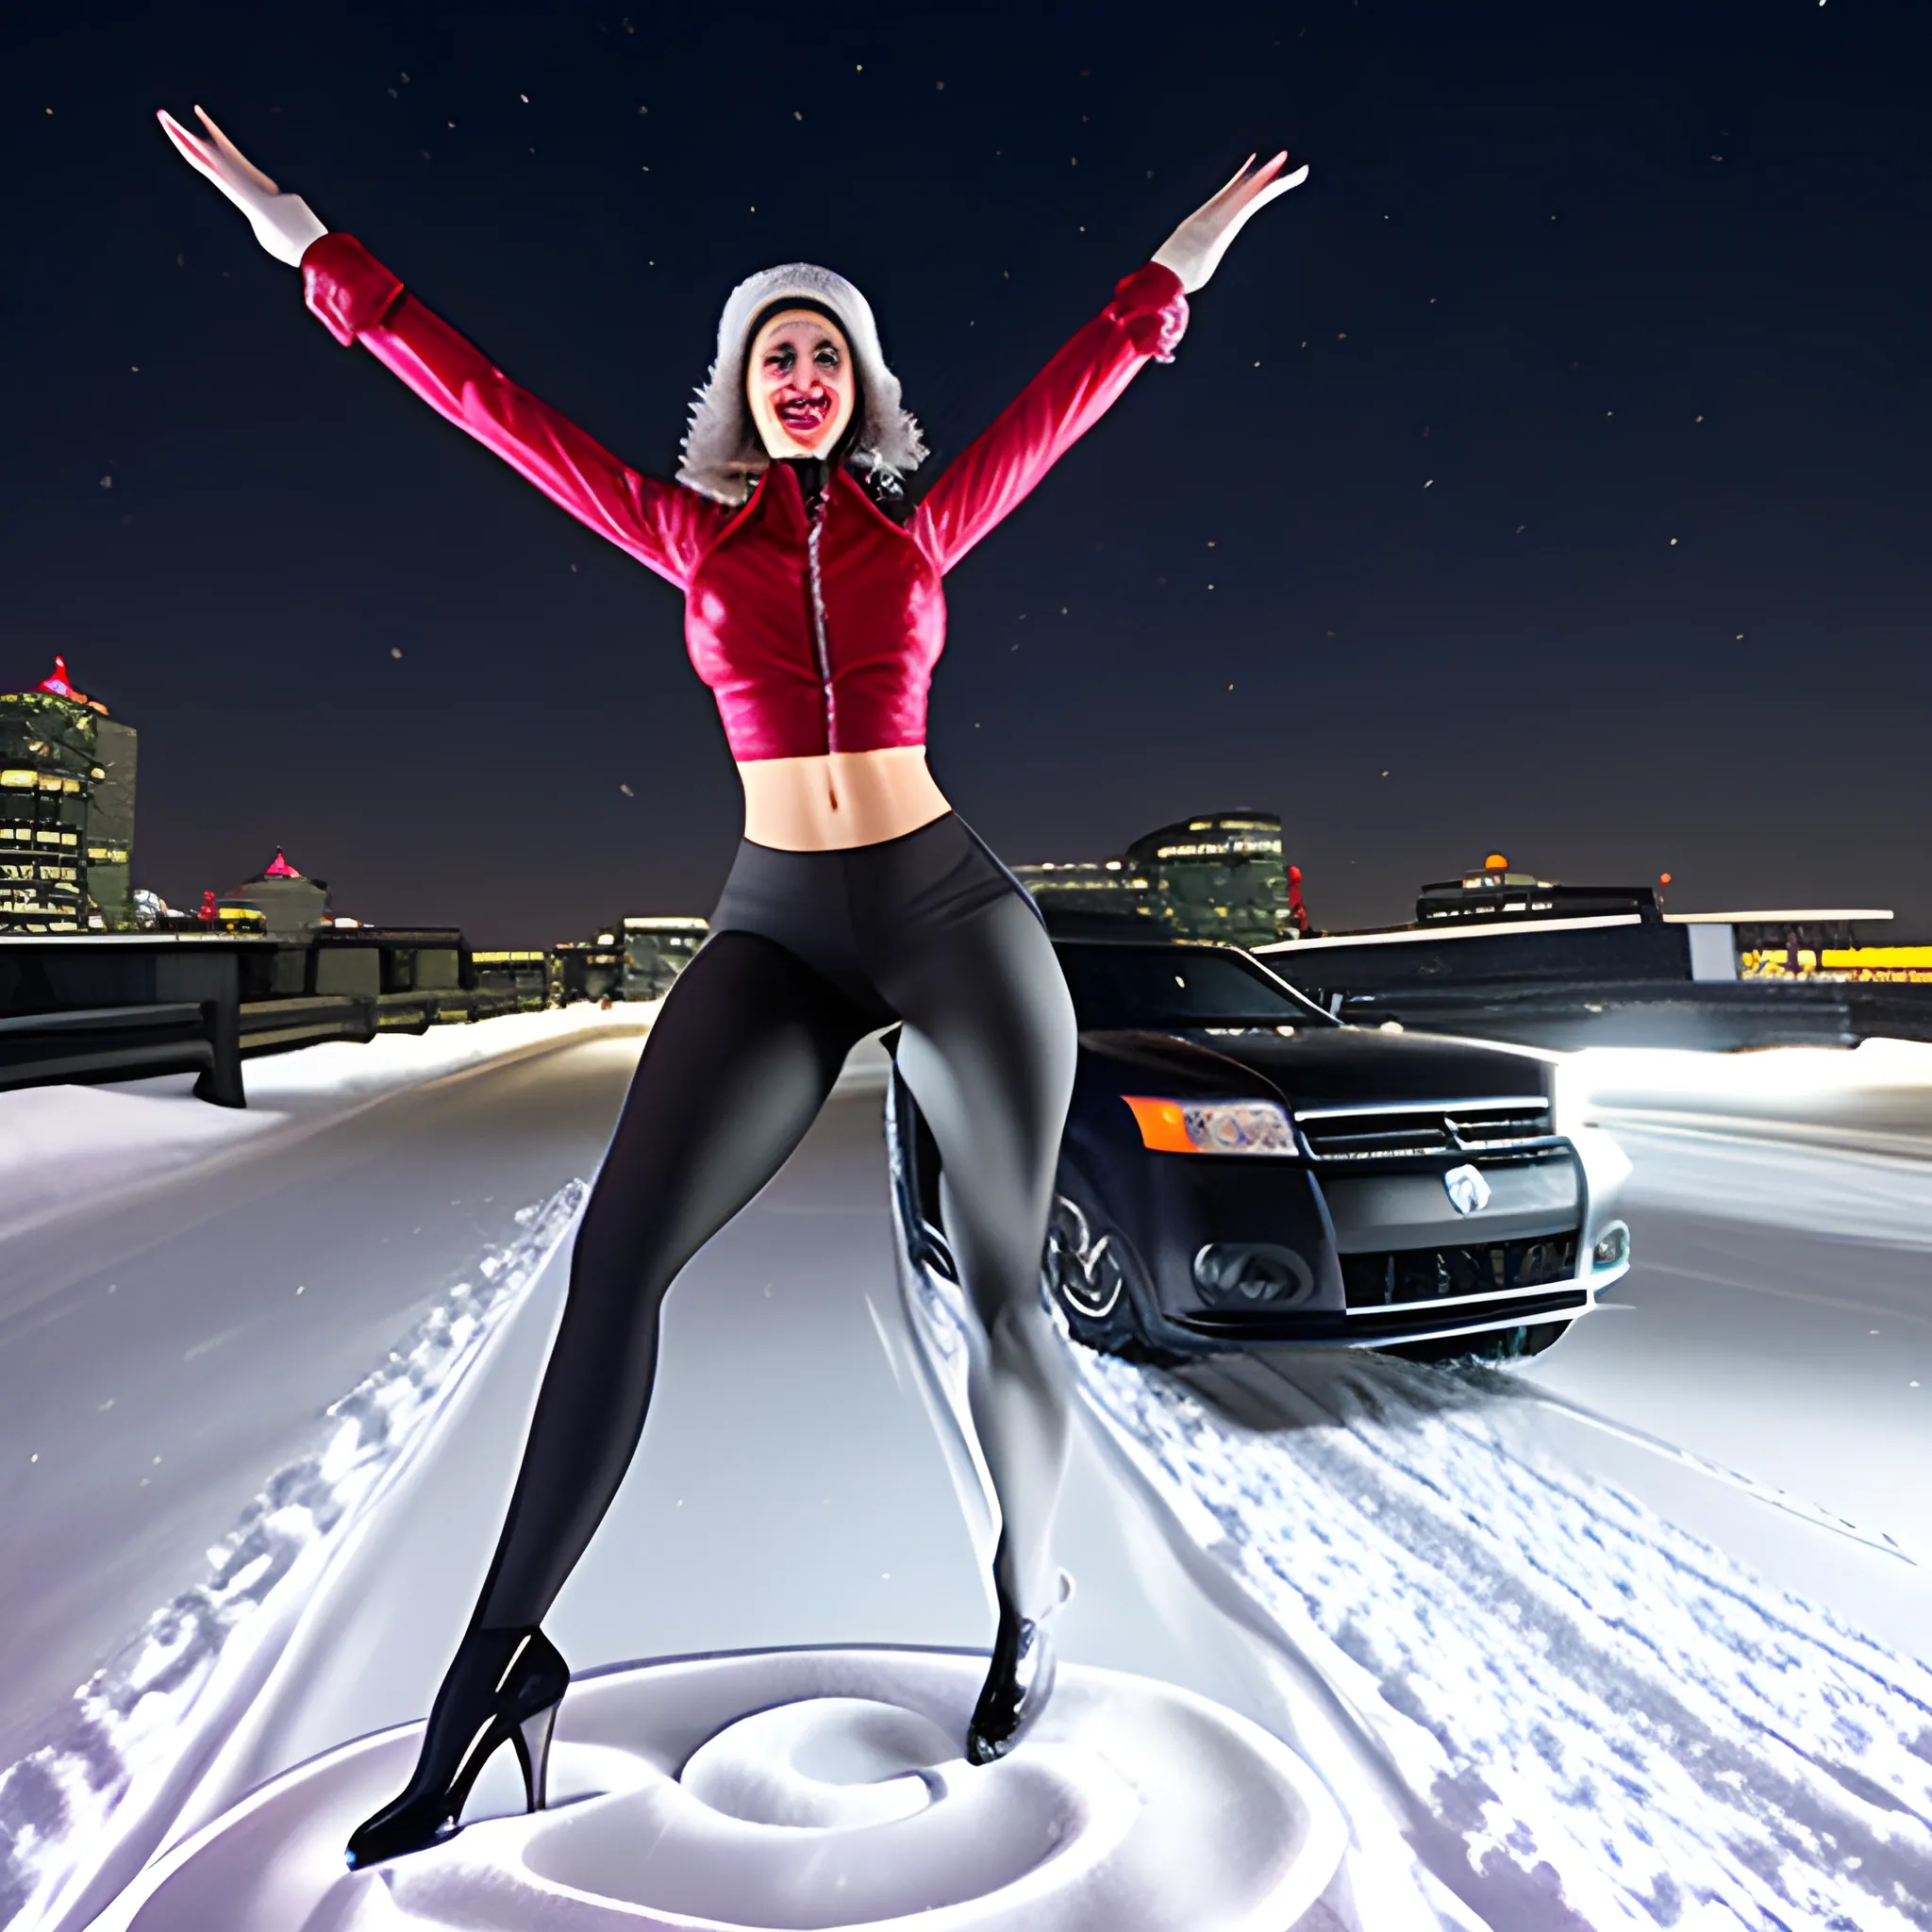 girl dancing on a roof of a car in the snow in the night